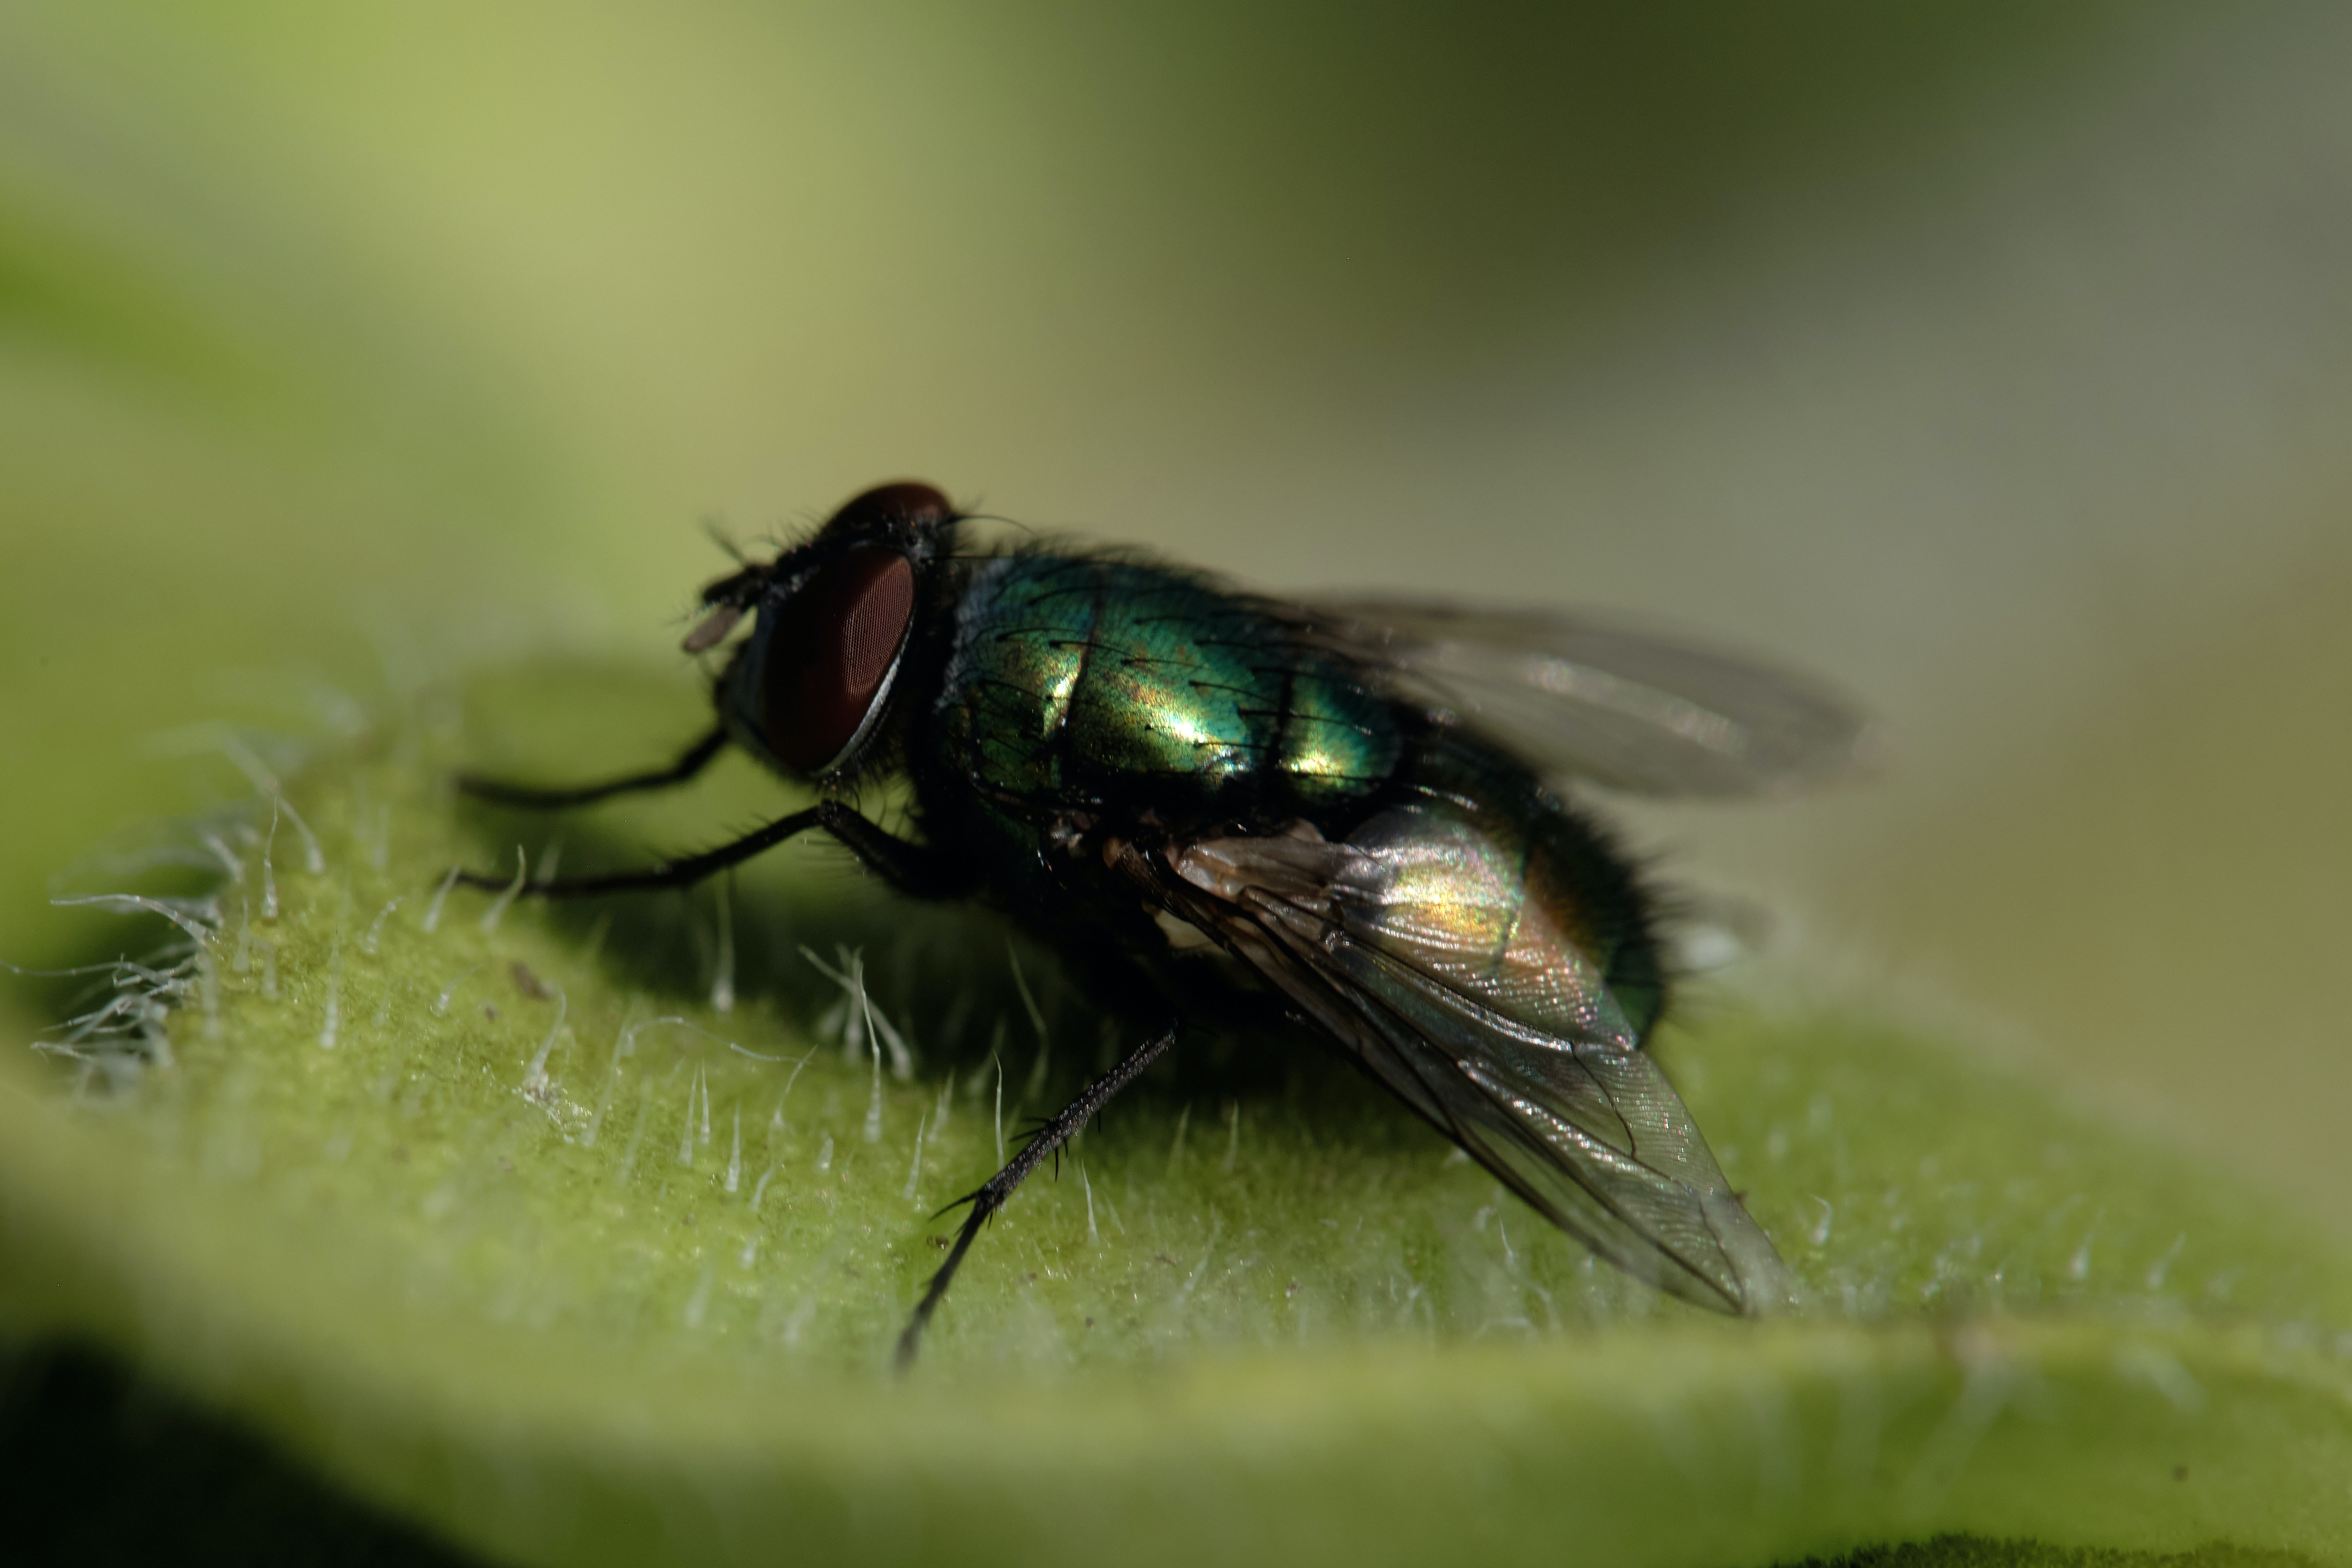 many diseases are transmitted by house flies